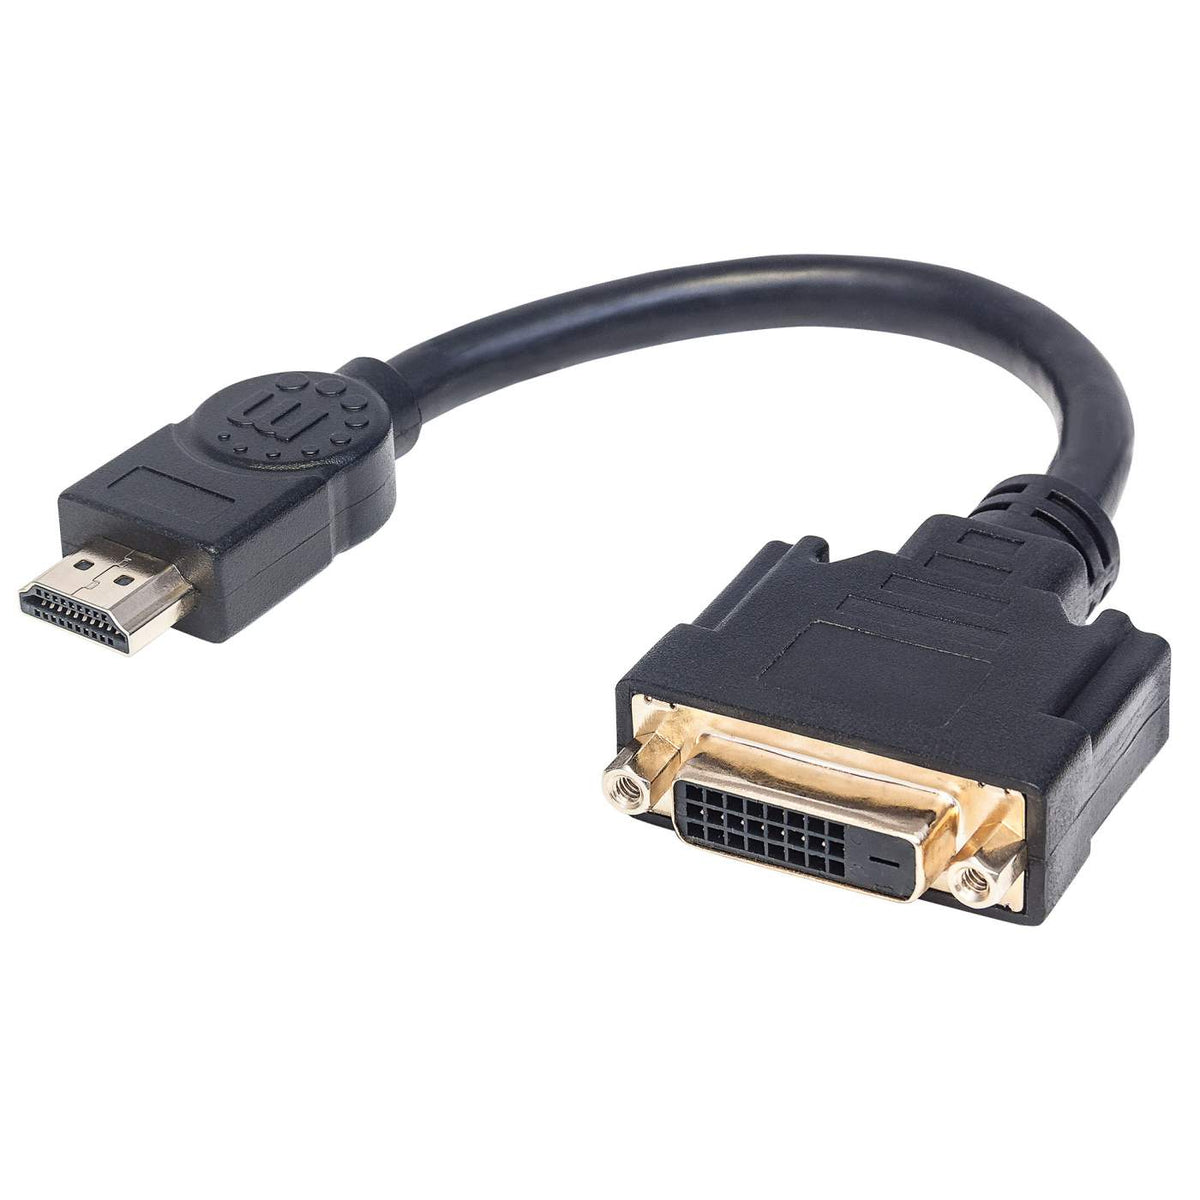 DVI-HD-3M-MM - DVI-D to HDMI-A single link cable, Male to Male (10